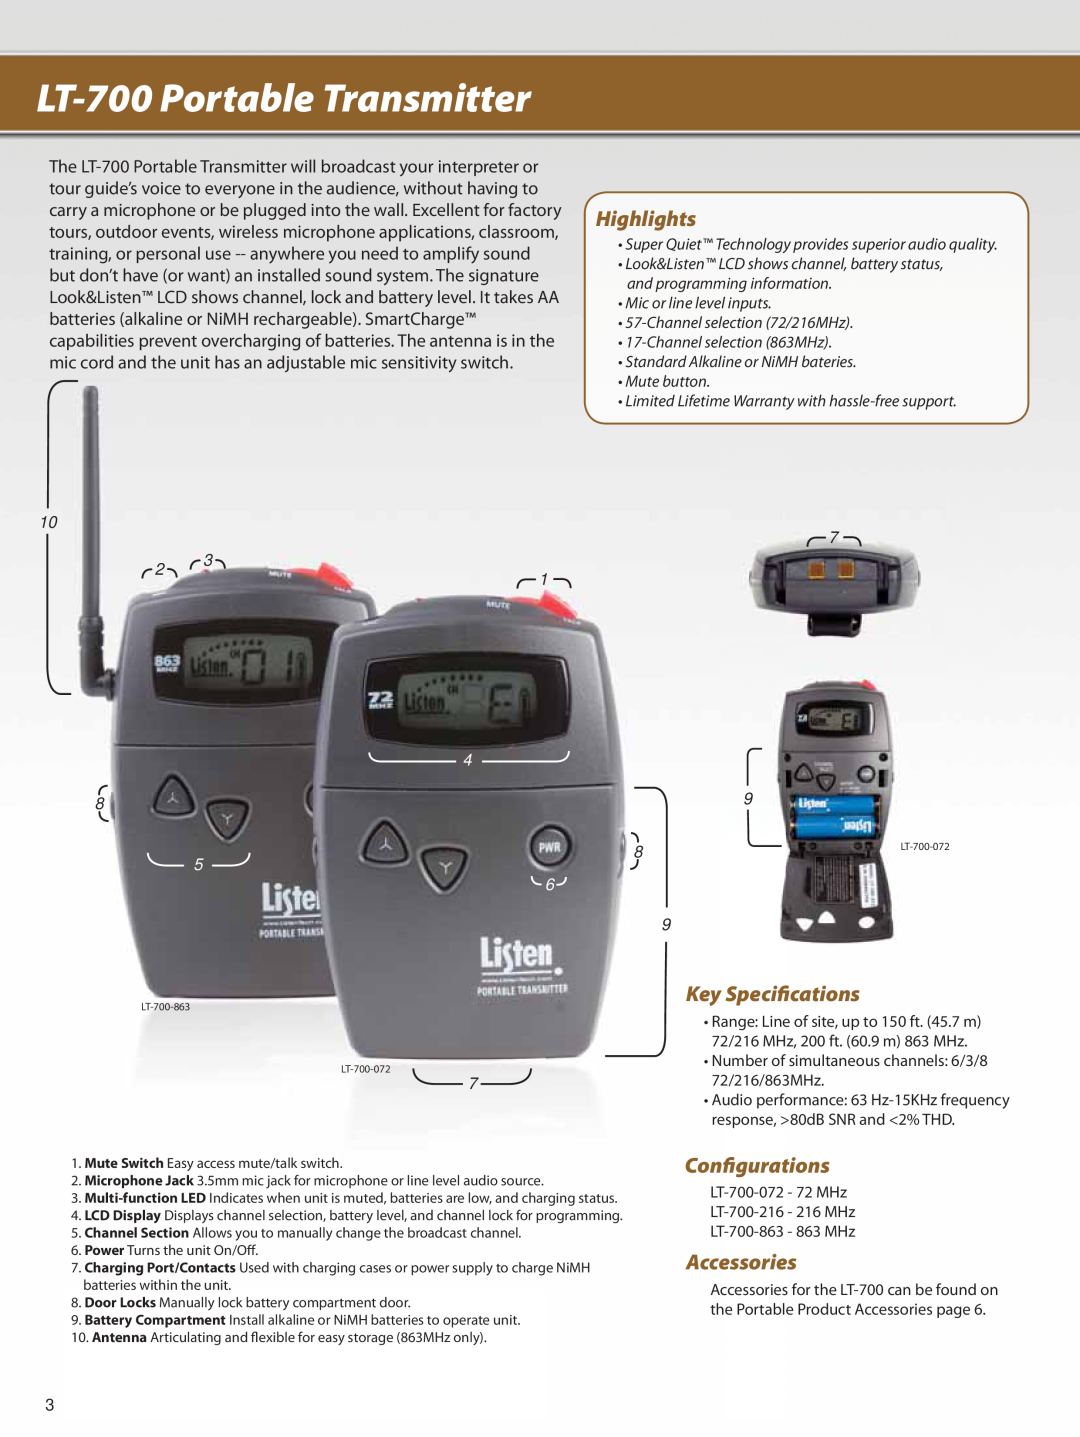 Listen Technologies Portable FM LT-700Portable Transmitter, Key Specifications, Configurations, Accessories, Highlights 